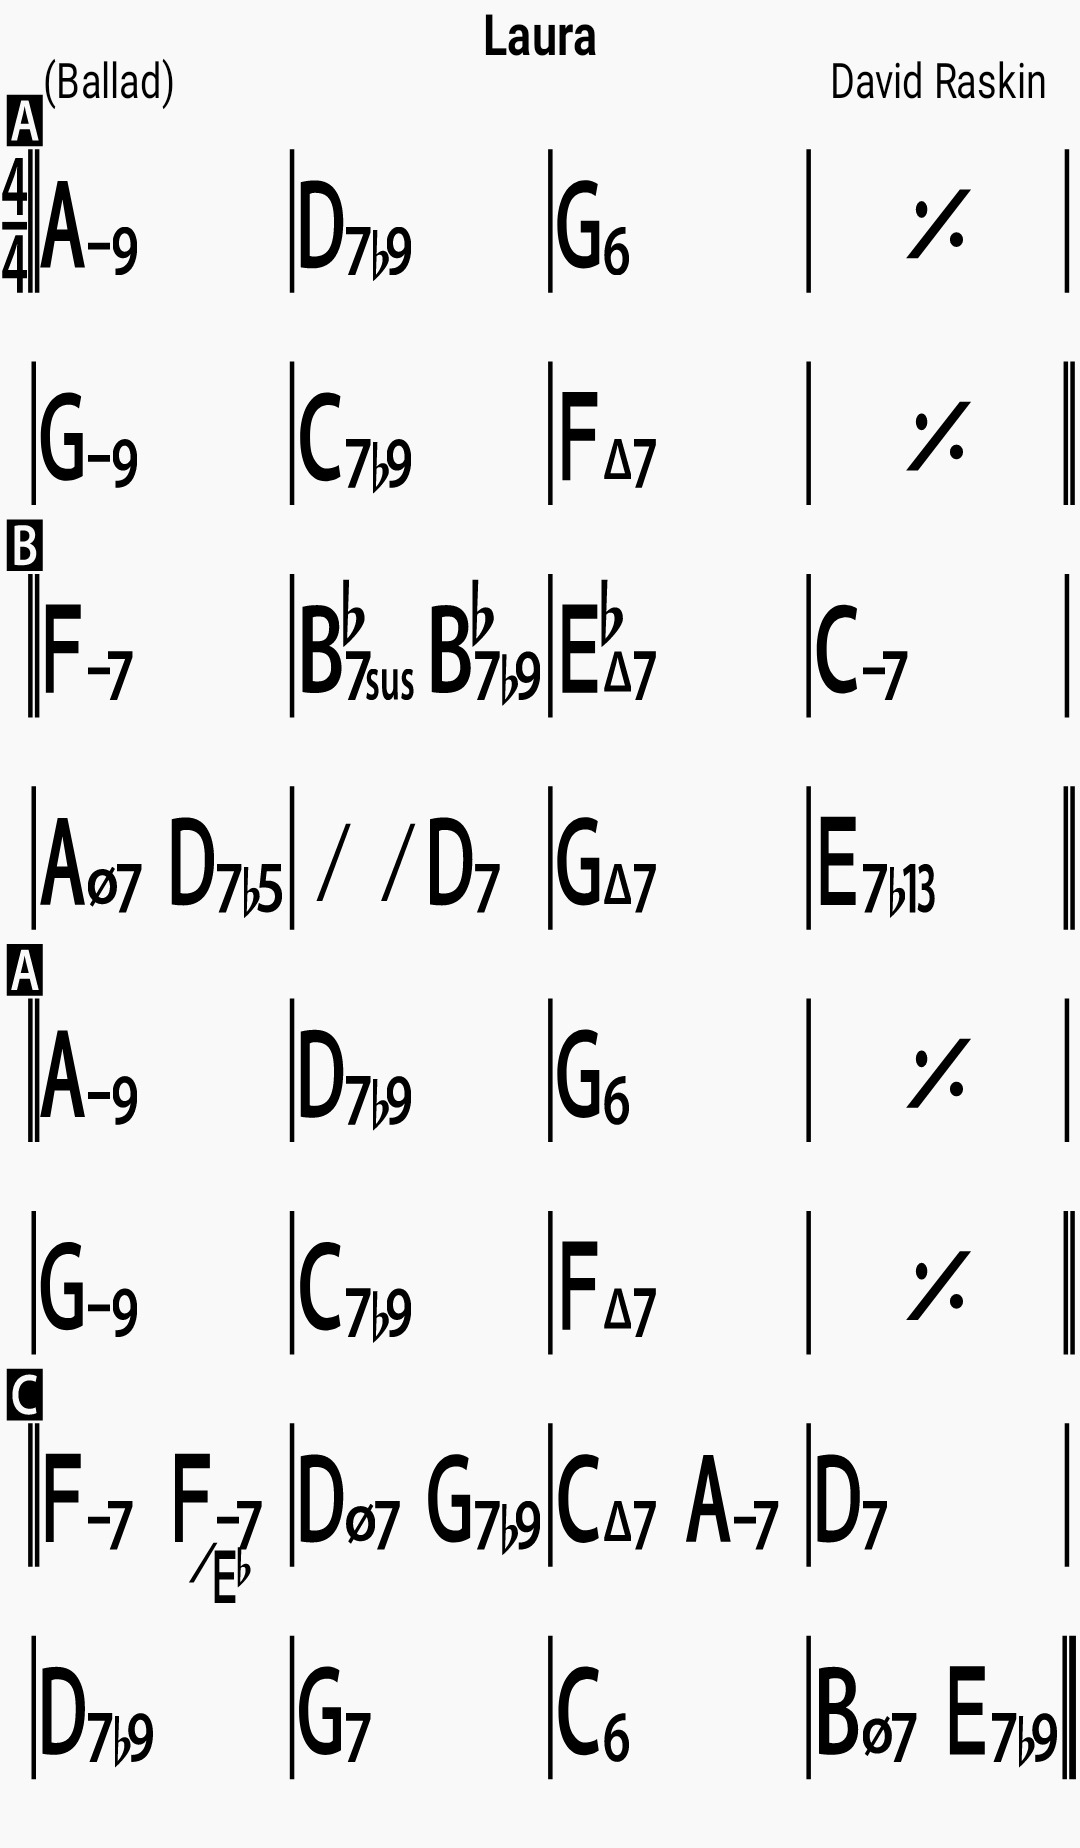 Chord chart for the jazz standard Laura